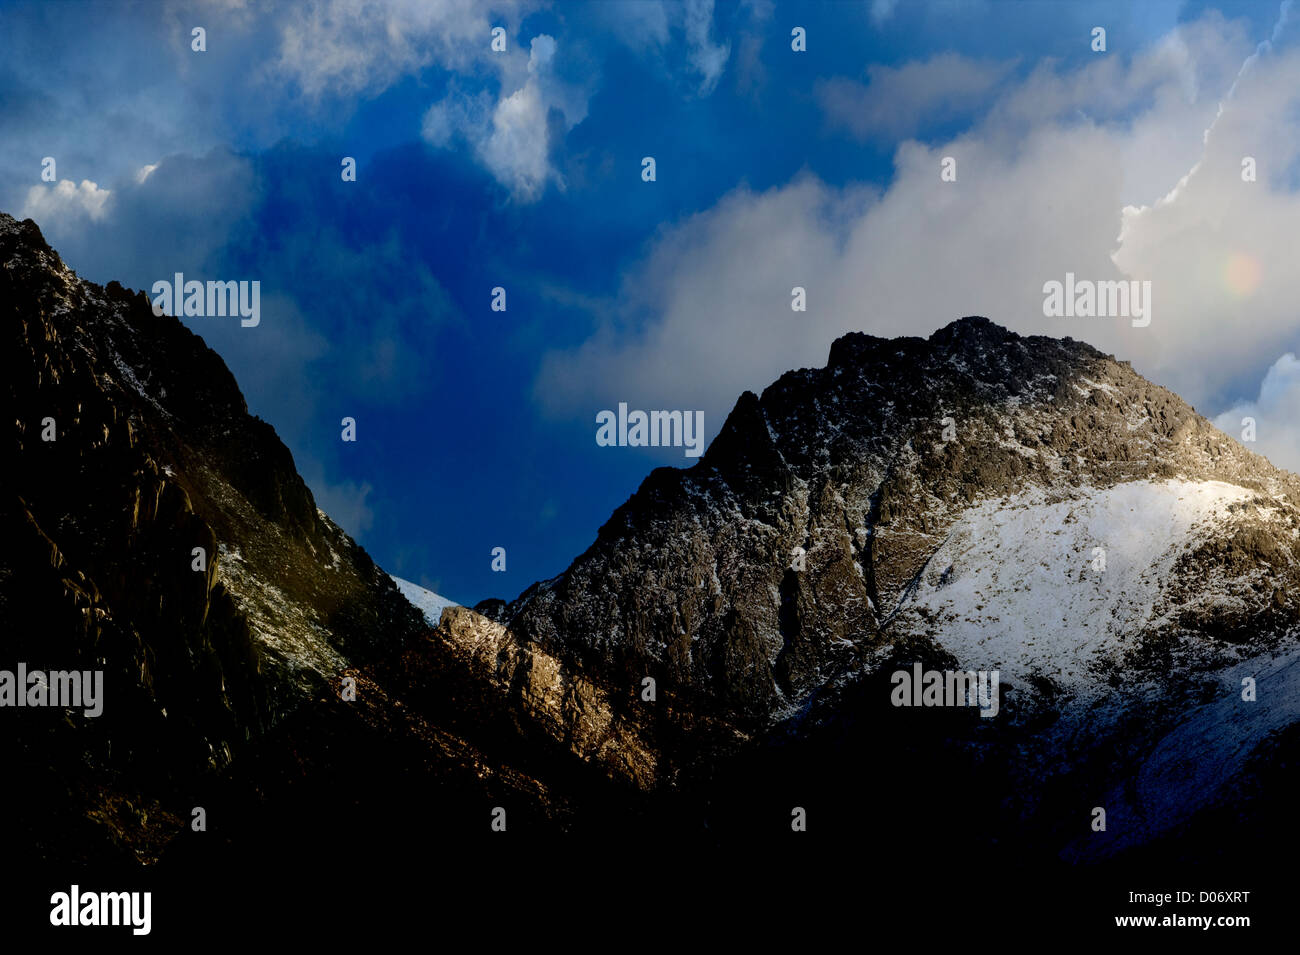 Snowdonia: a digital art showing Tryfan Mountain composite picture Stock Photo